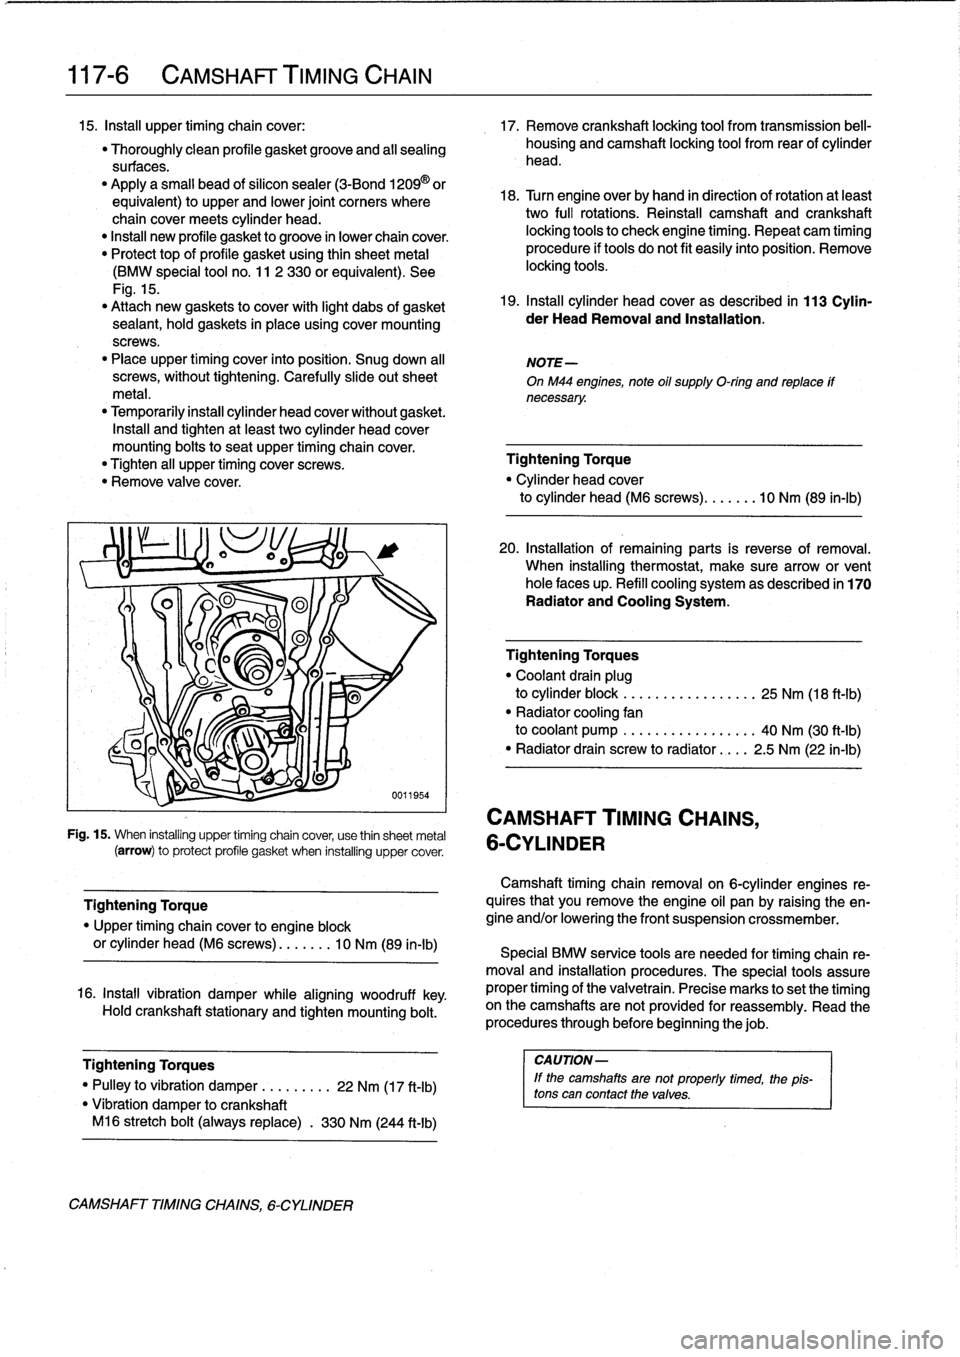 BMW M3 1993 E36 Workshop Manual 
117-
6

	

CAMSHAFT
TIMING
CHAIN

15
.
Insta¡¡
upper
timing
chaincover
:

	

17
.
Remove
crankshaft
locking
tool
from
transmission
bell-

"
Thoroughly
clean
profile
gasketgroove
and
all
sealing

	
